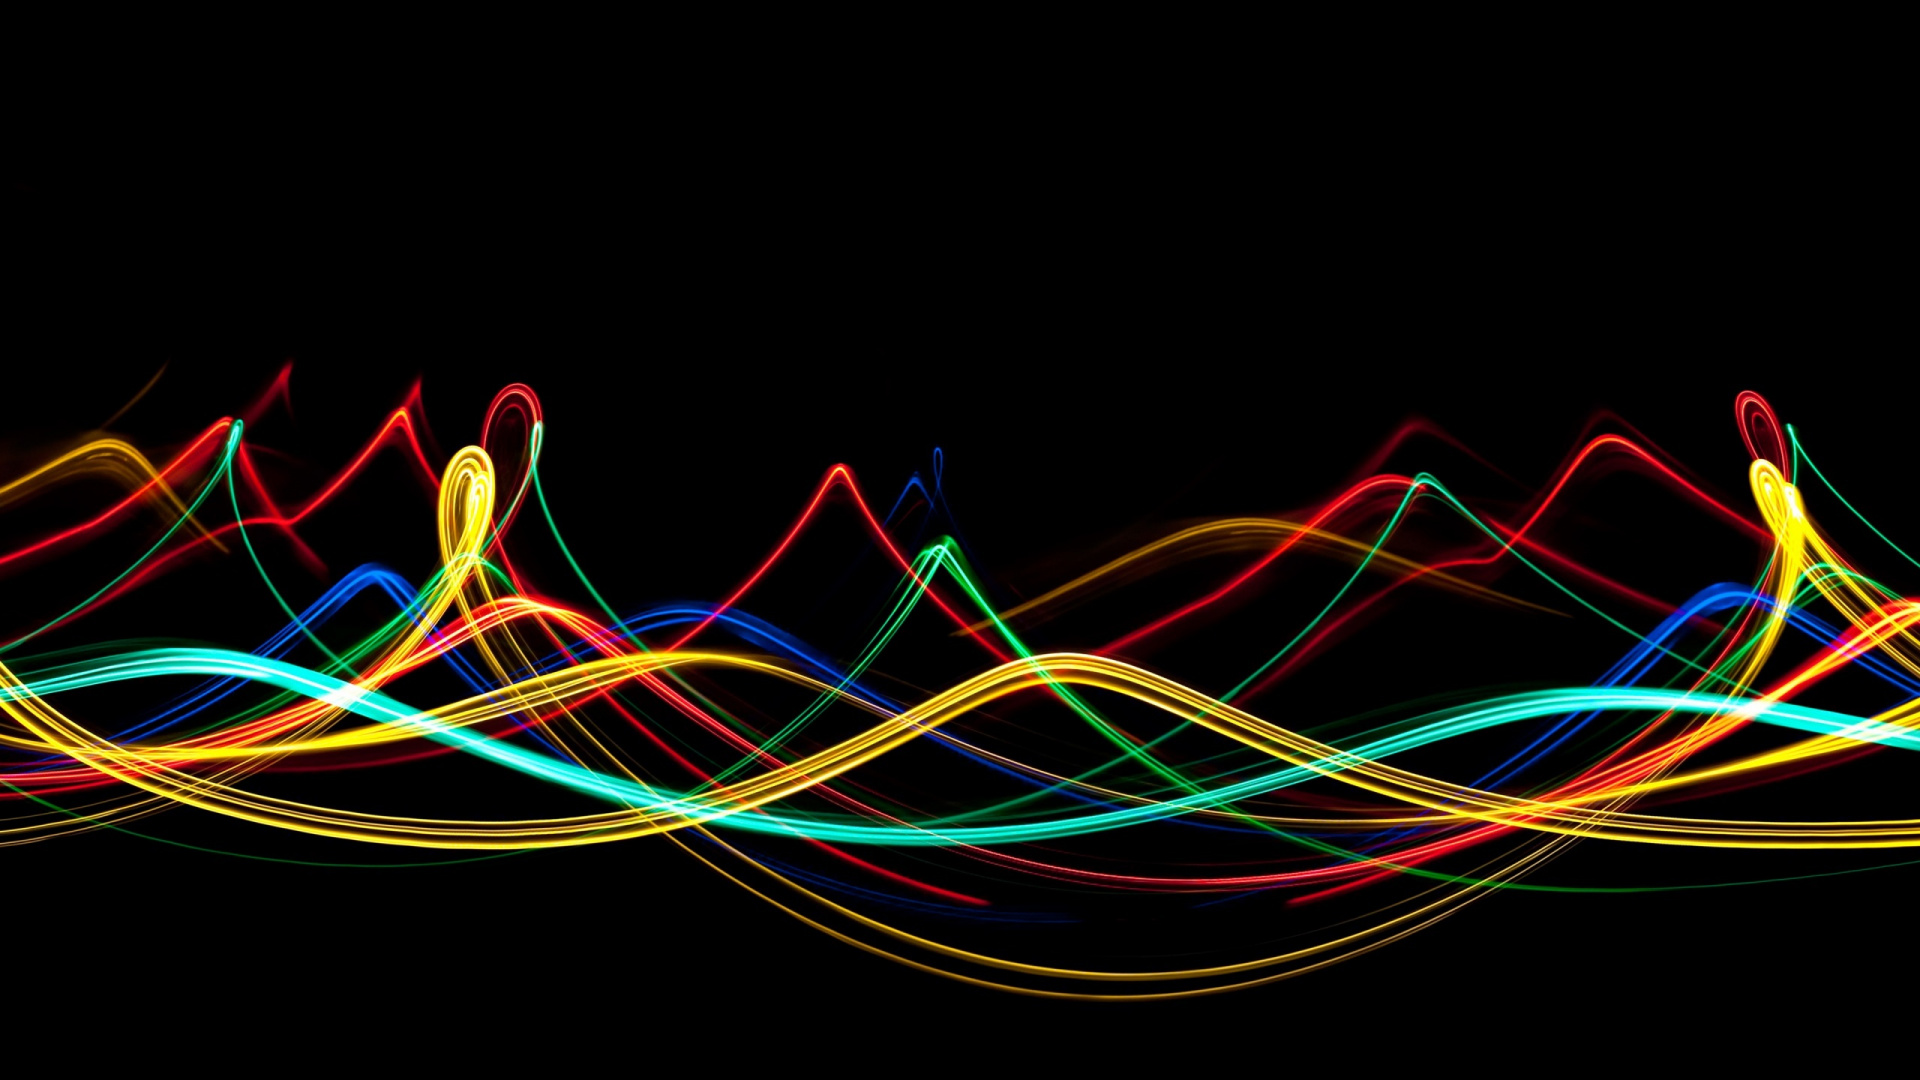 Red Yellow and Blue Light. Wallpaper in 1920x1080 Resolution